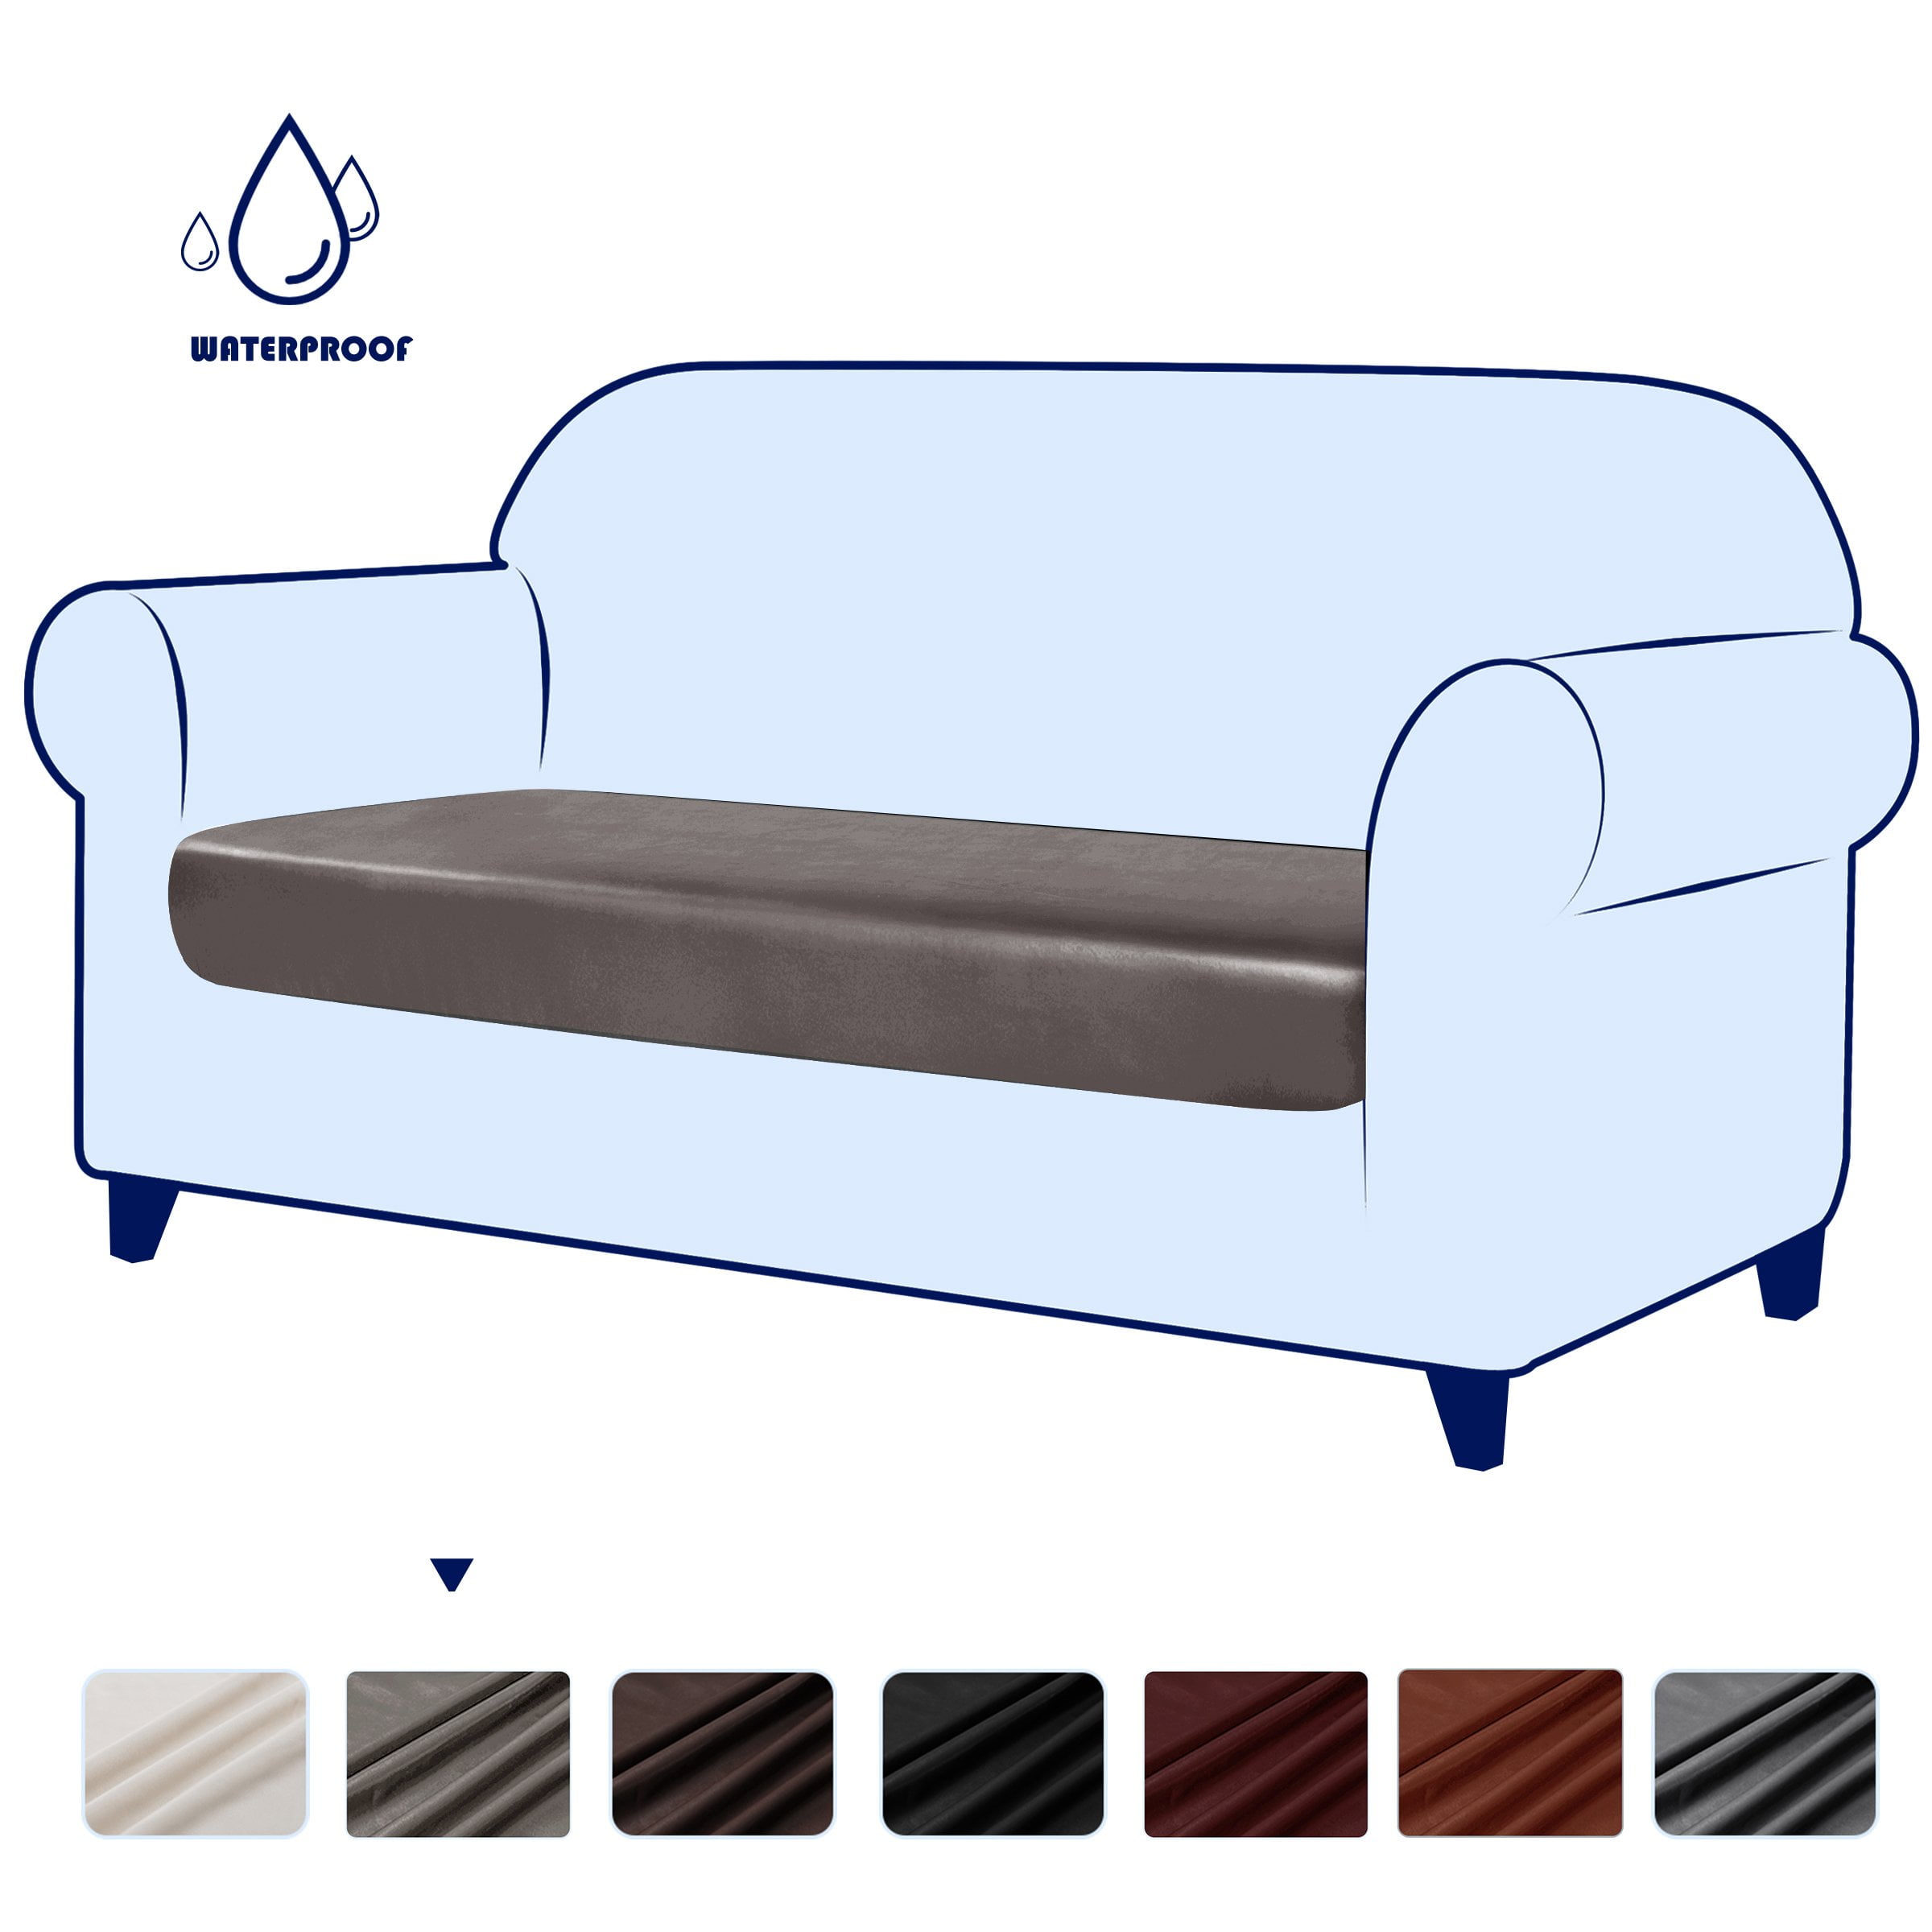 Waterproof Sofa Seat Covers For Living Room Elastic with Cushion Cover 